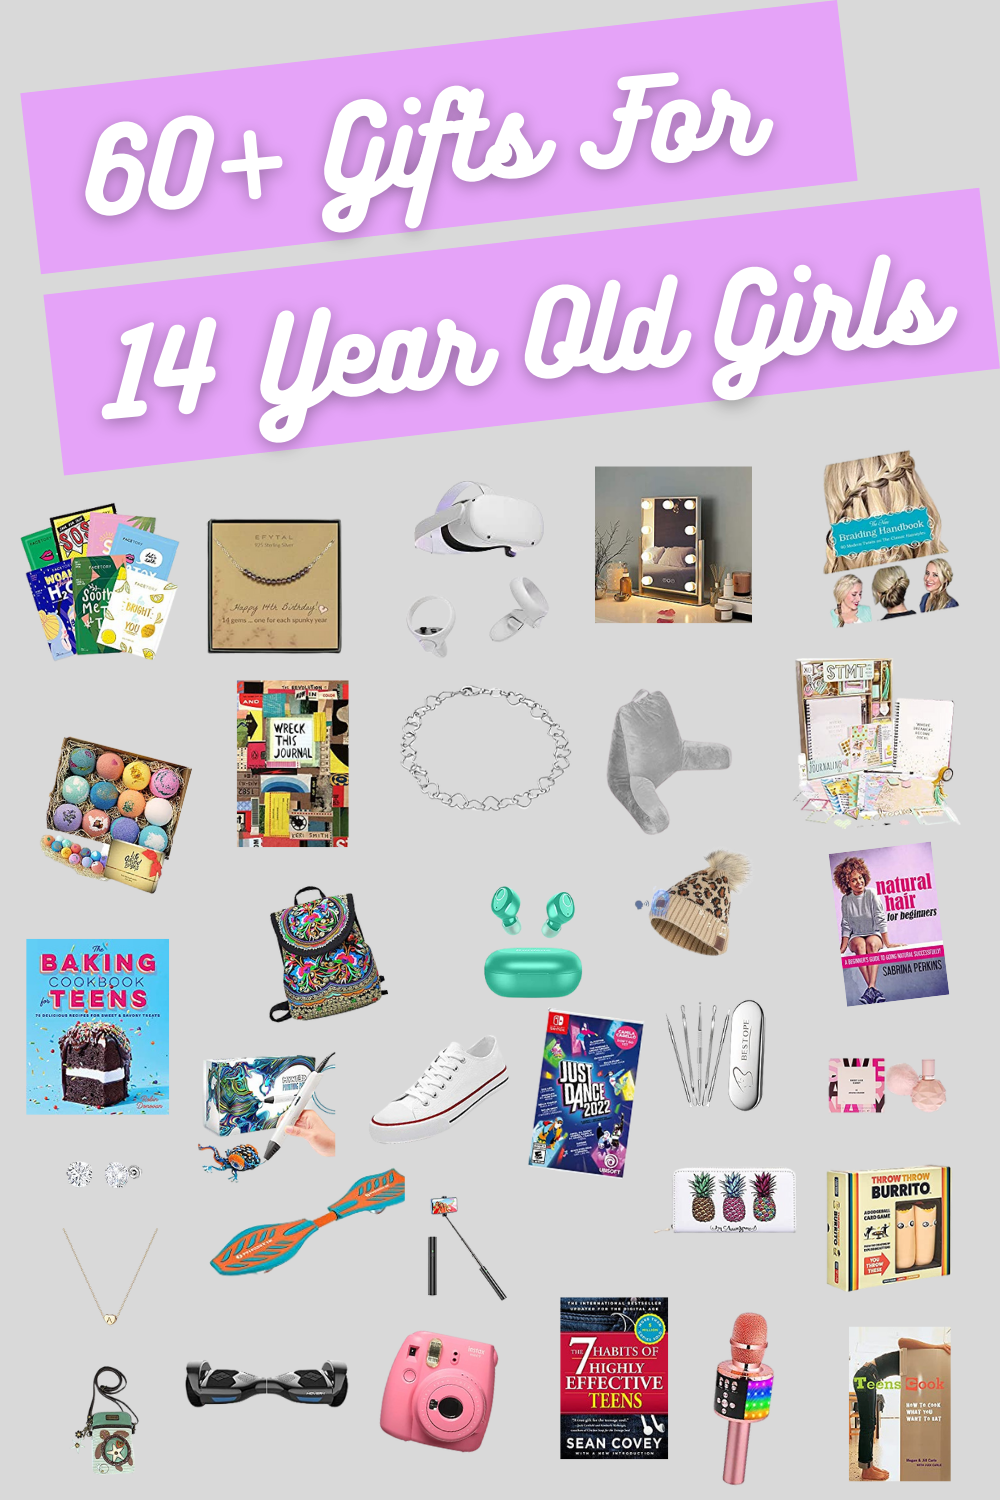 Cool Gifts for Teen Girls - Imagination Soup